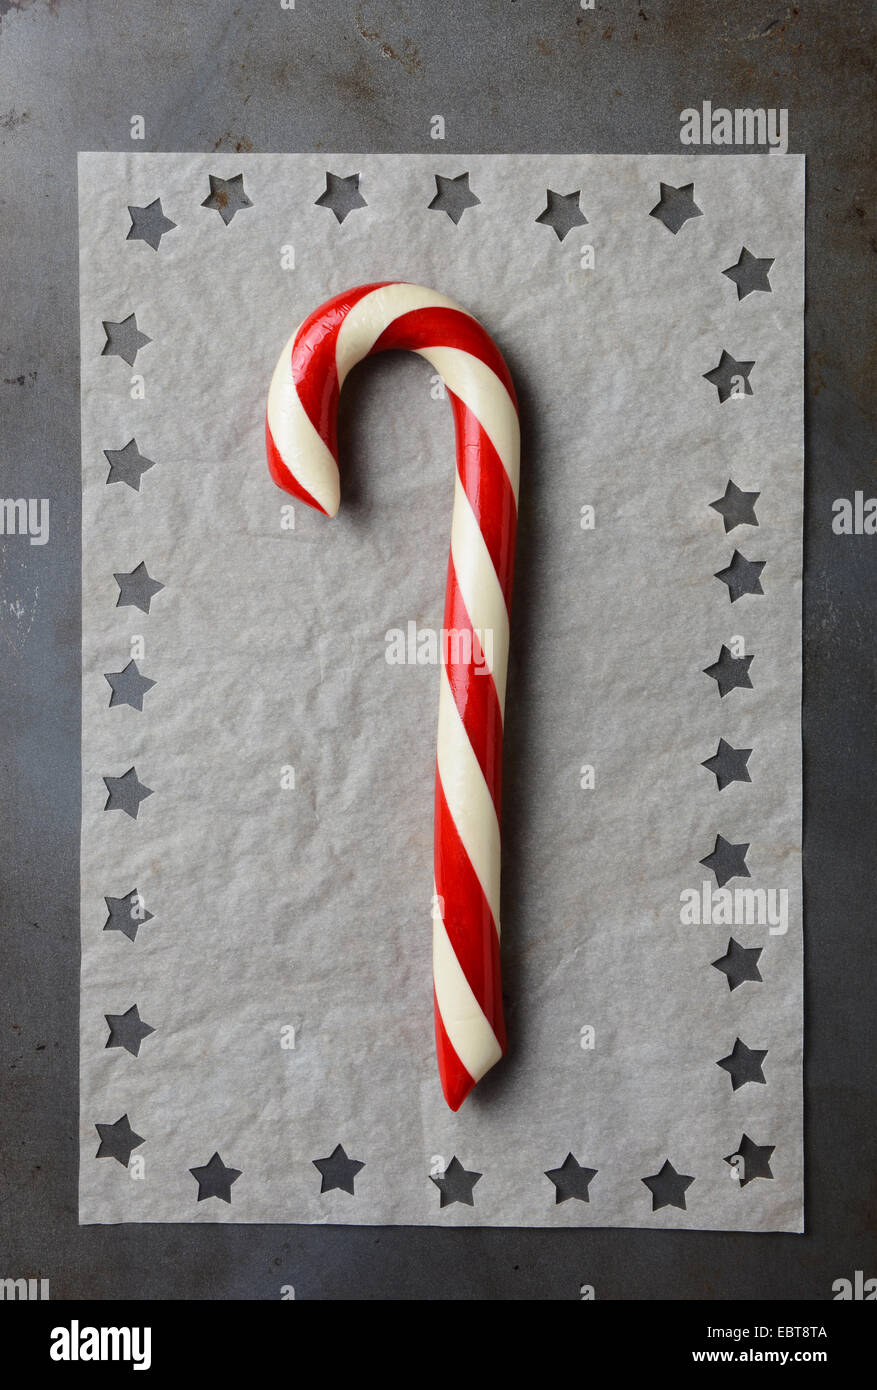 Closeup high angle shot of an old fashioned candy cane on parchment paper with star shapes cut into the papers edge. Vertical fo Stock Photo